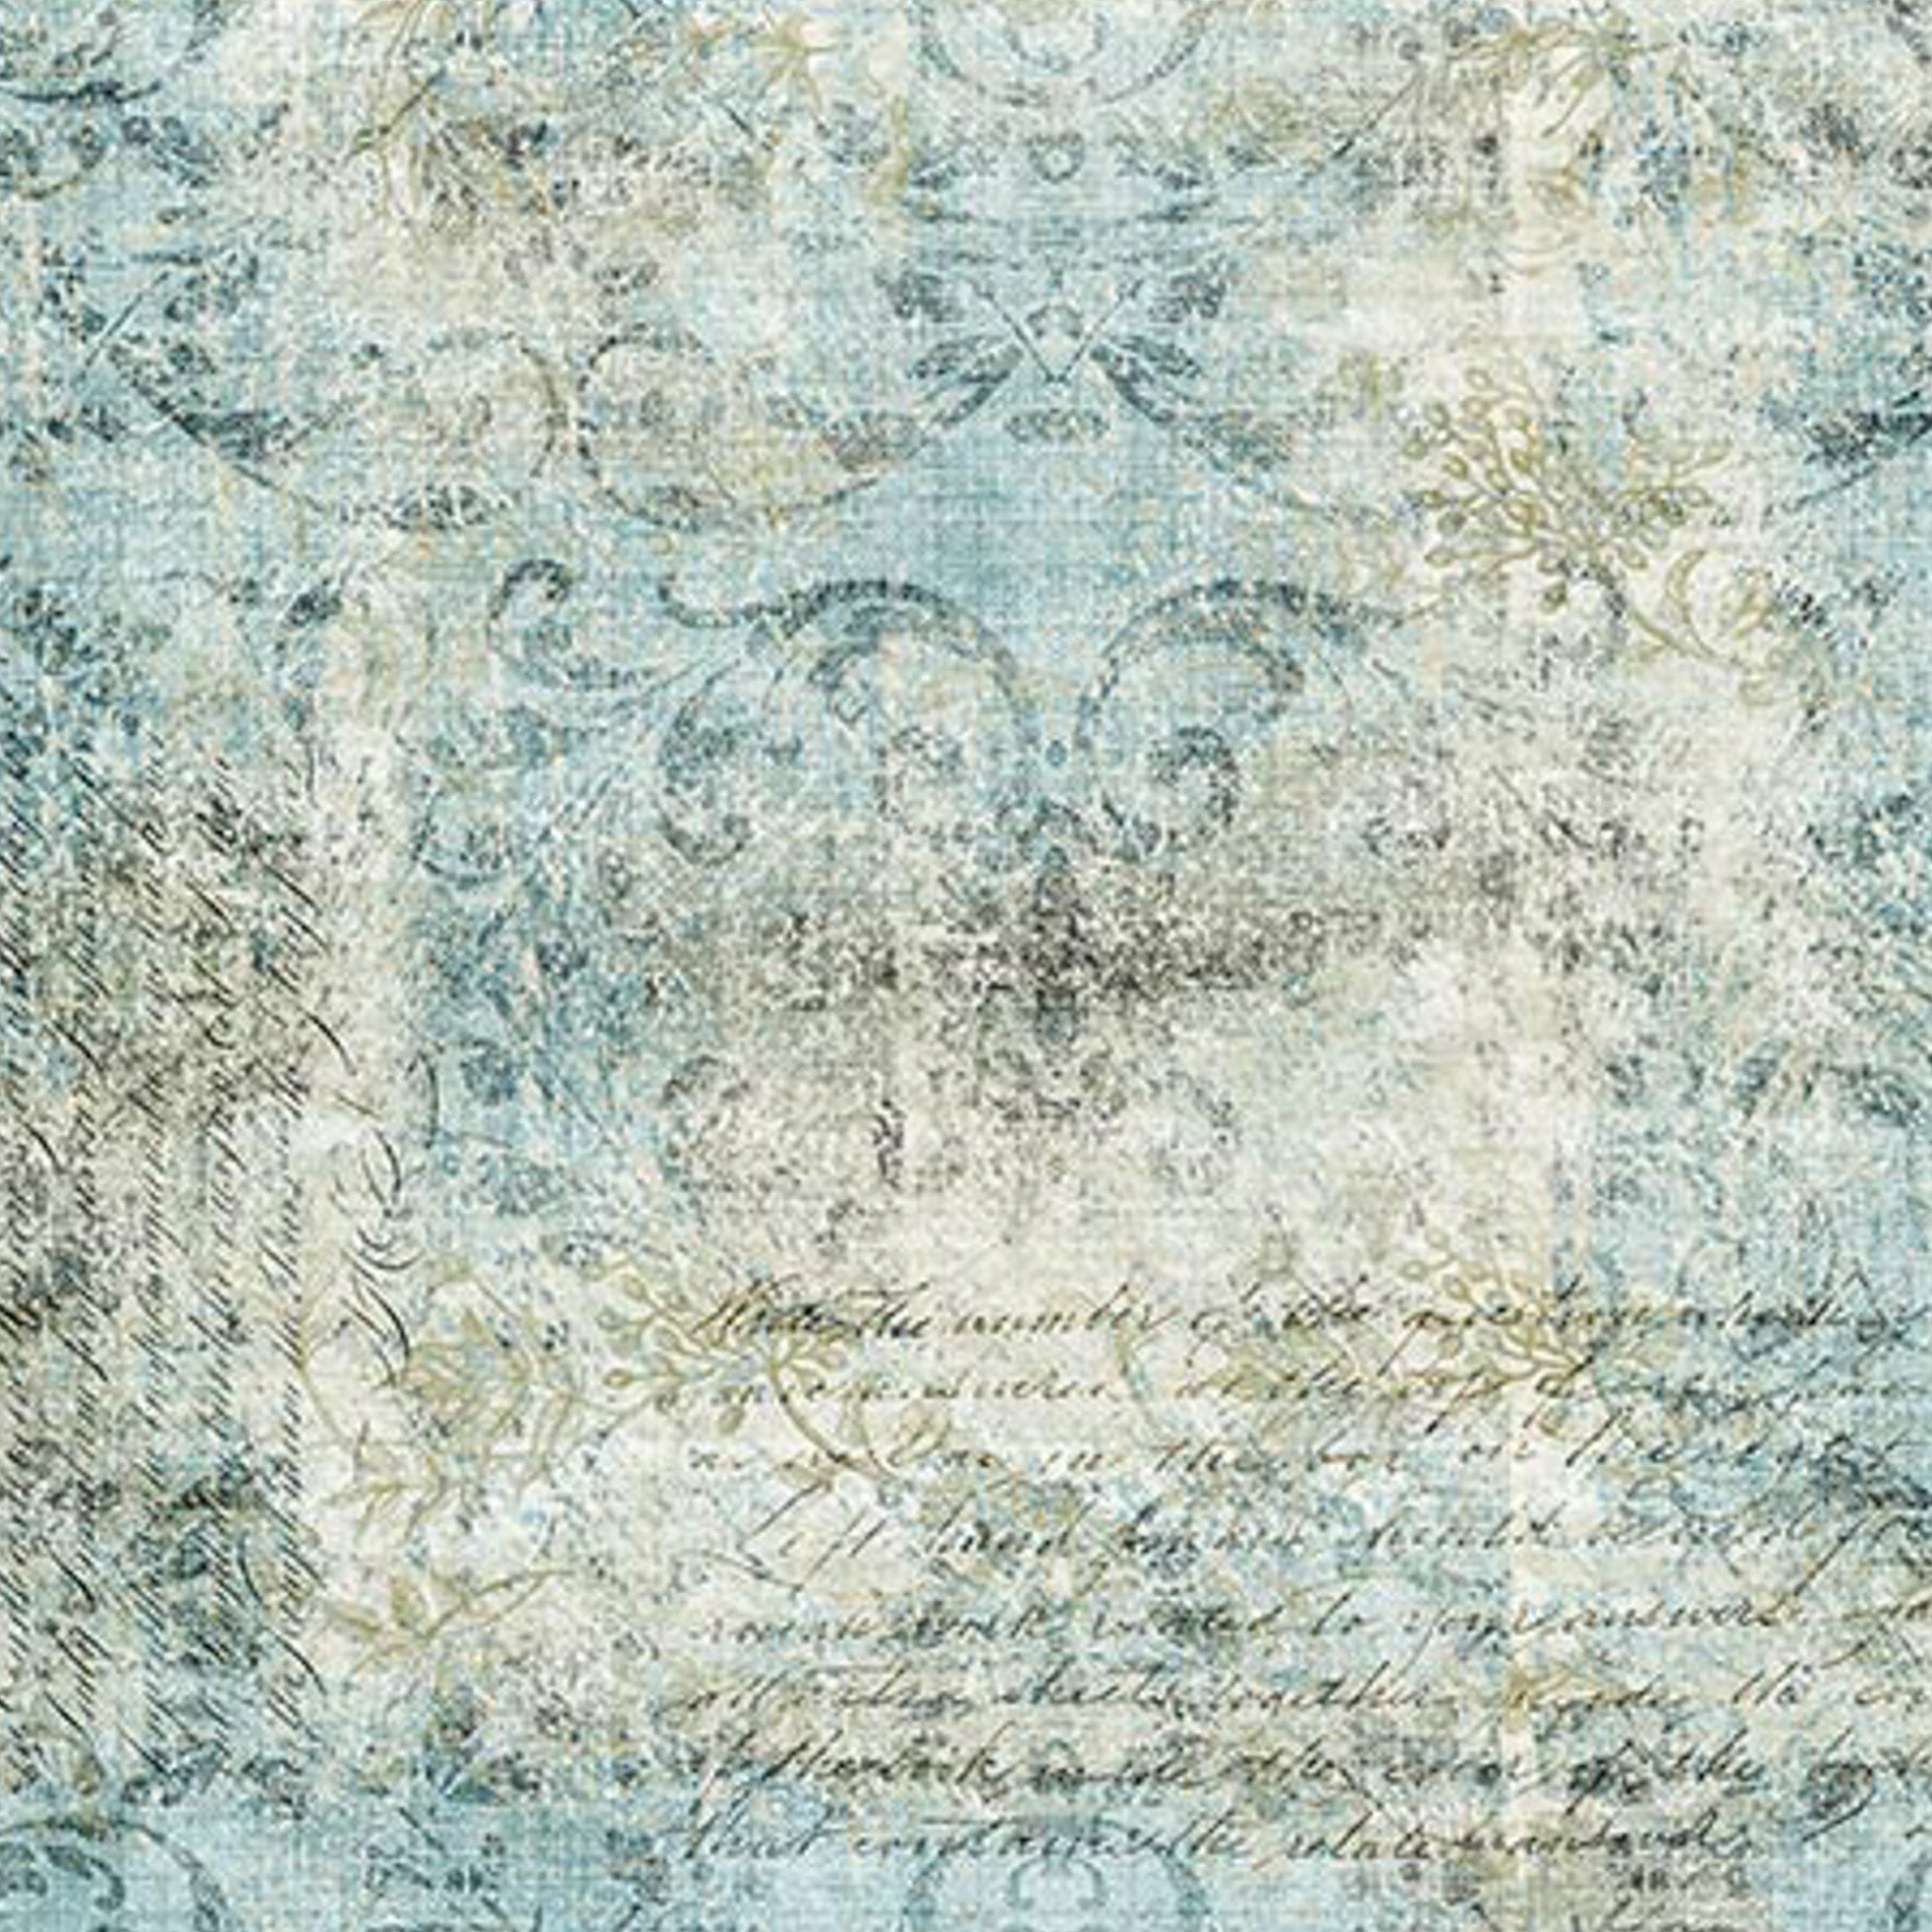 A2 rice decoupage paper of a faded light blue and cream colored fabric that has a worn damask scroll design and script writing.